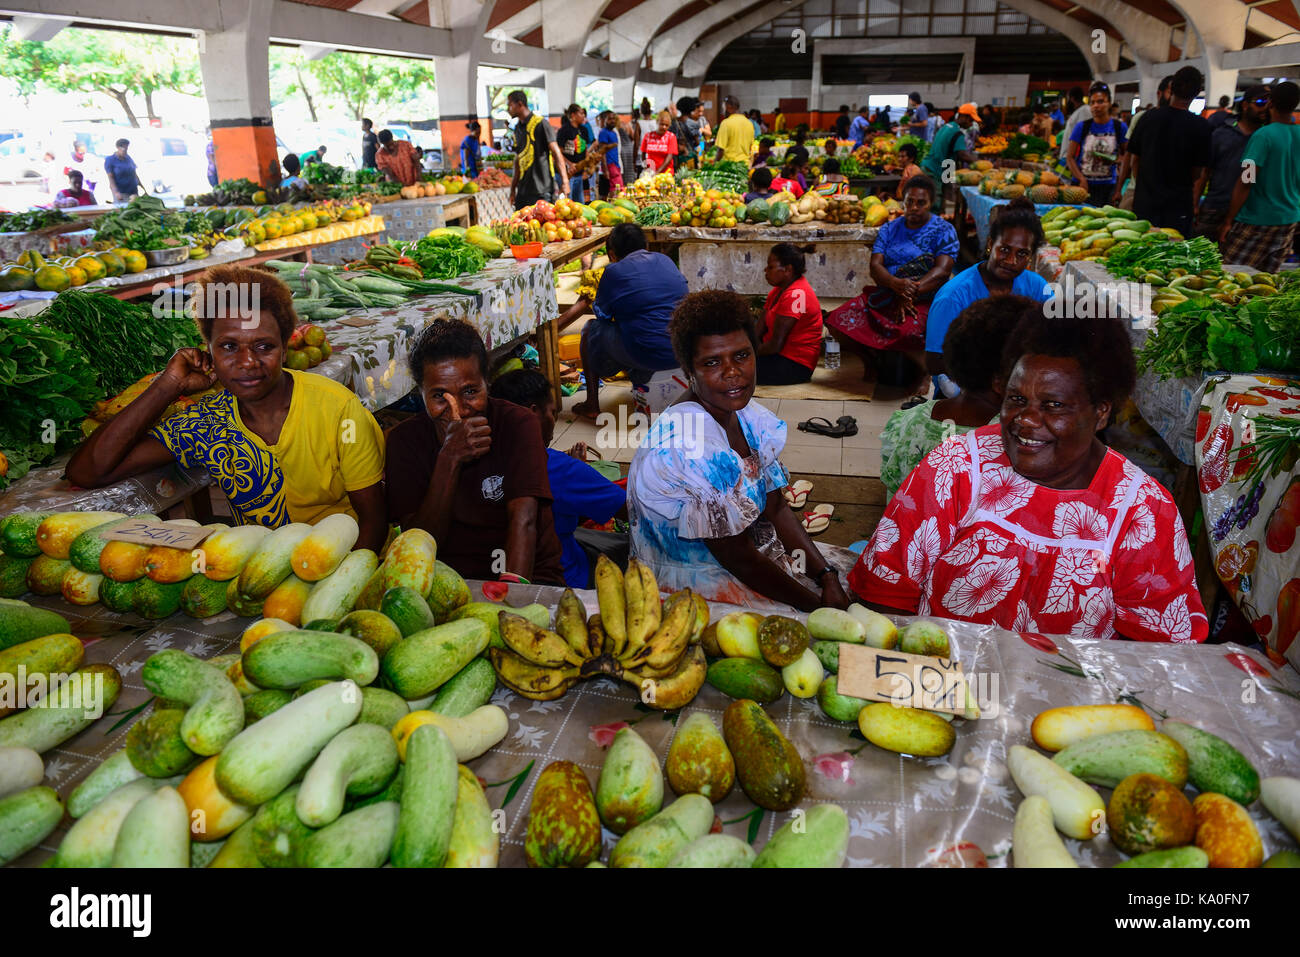 Market stall with vegetables for sale, market in Port Vila, Island of Efate, Vanuatu, South Sea, Oceania Stock Photo